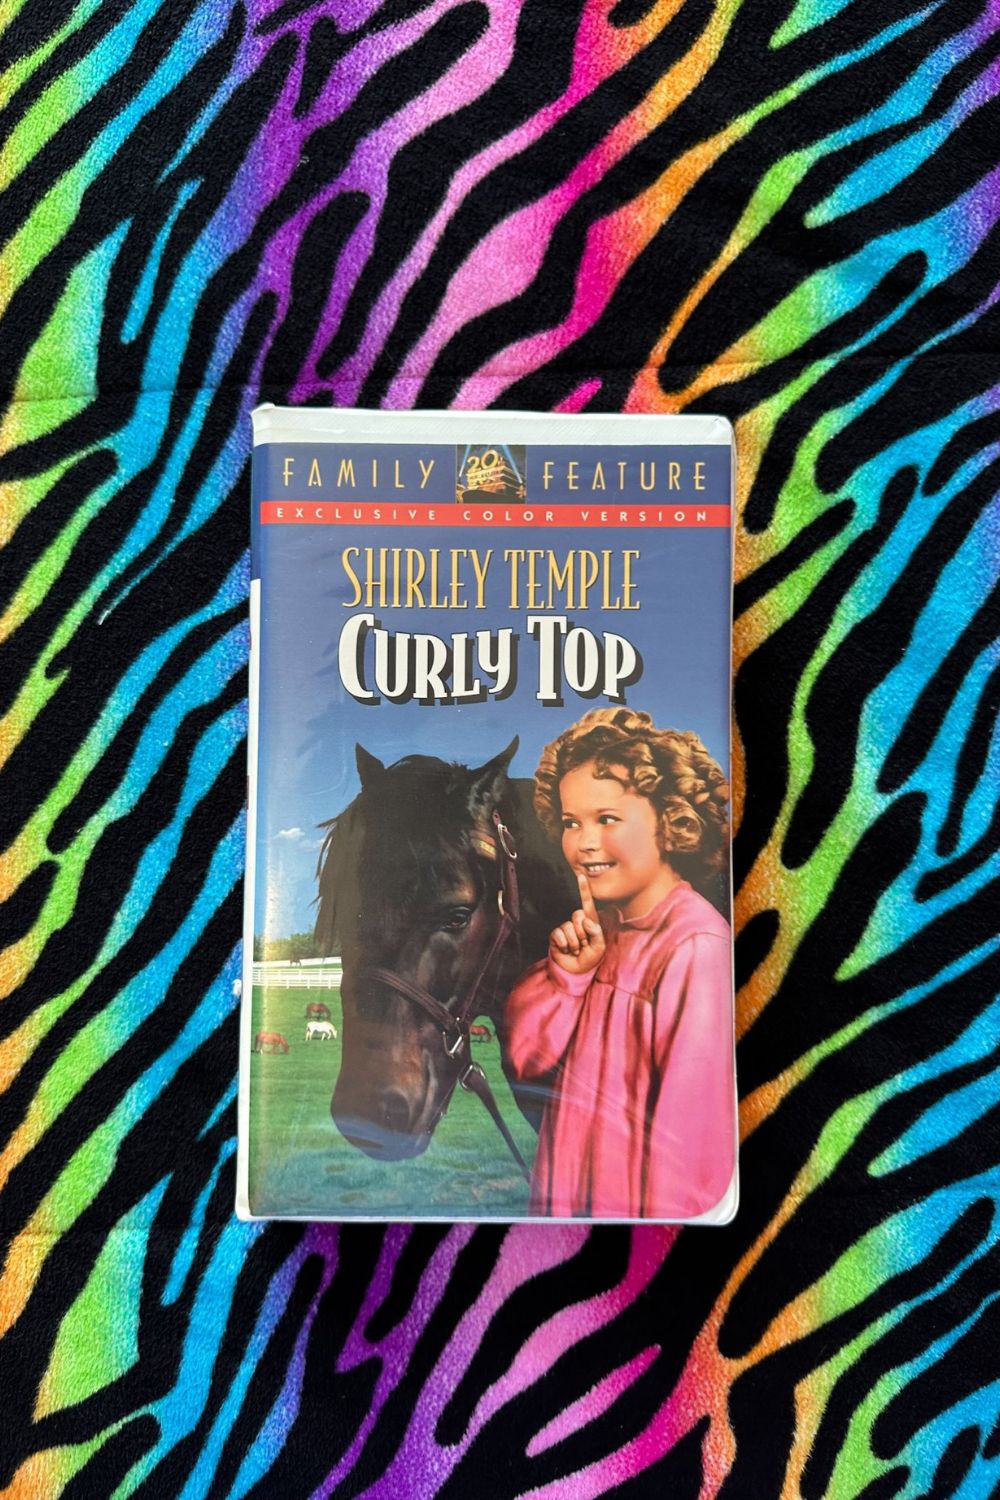 SHIRLEY TEMPLE "CURLY TOP" VHS*